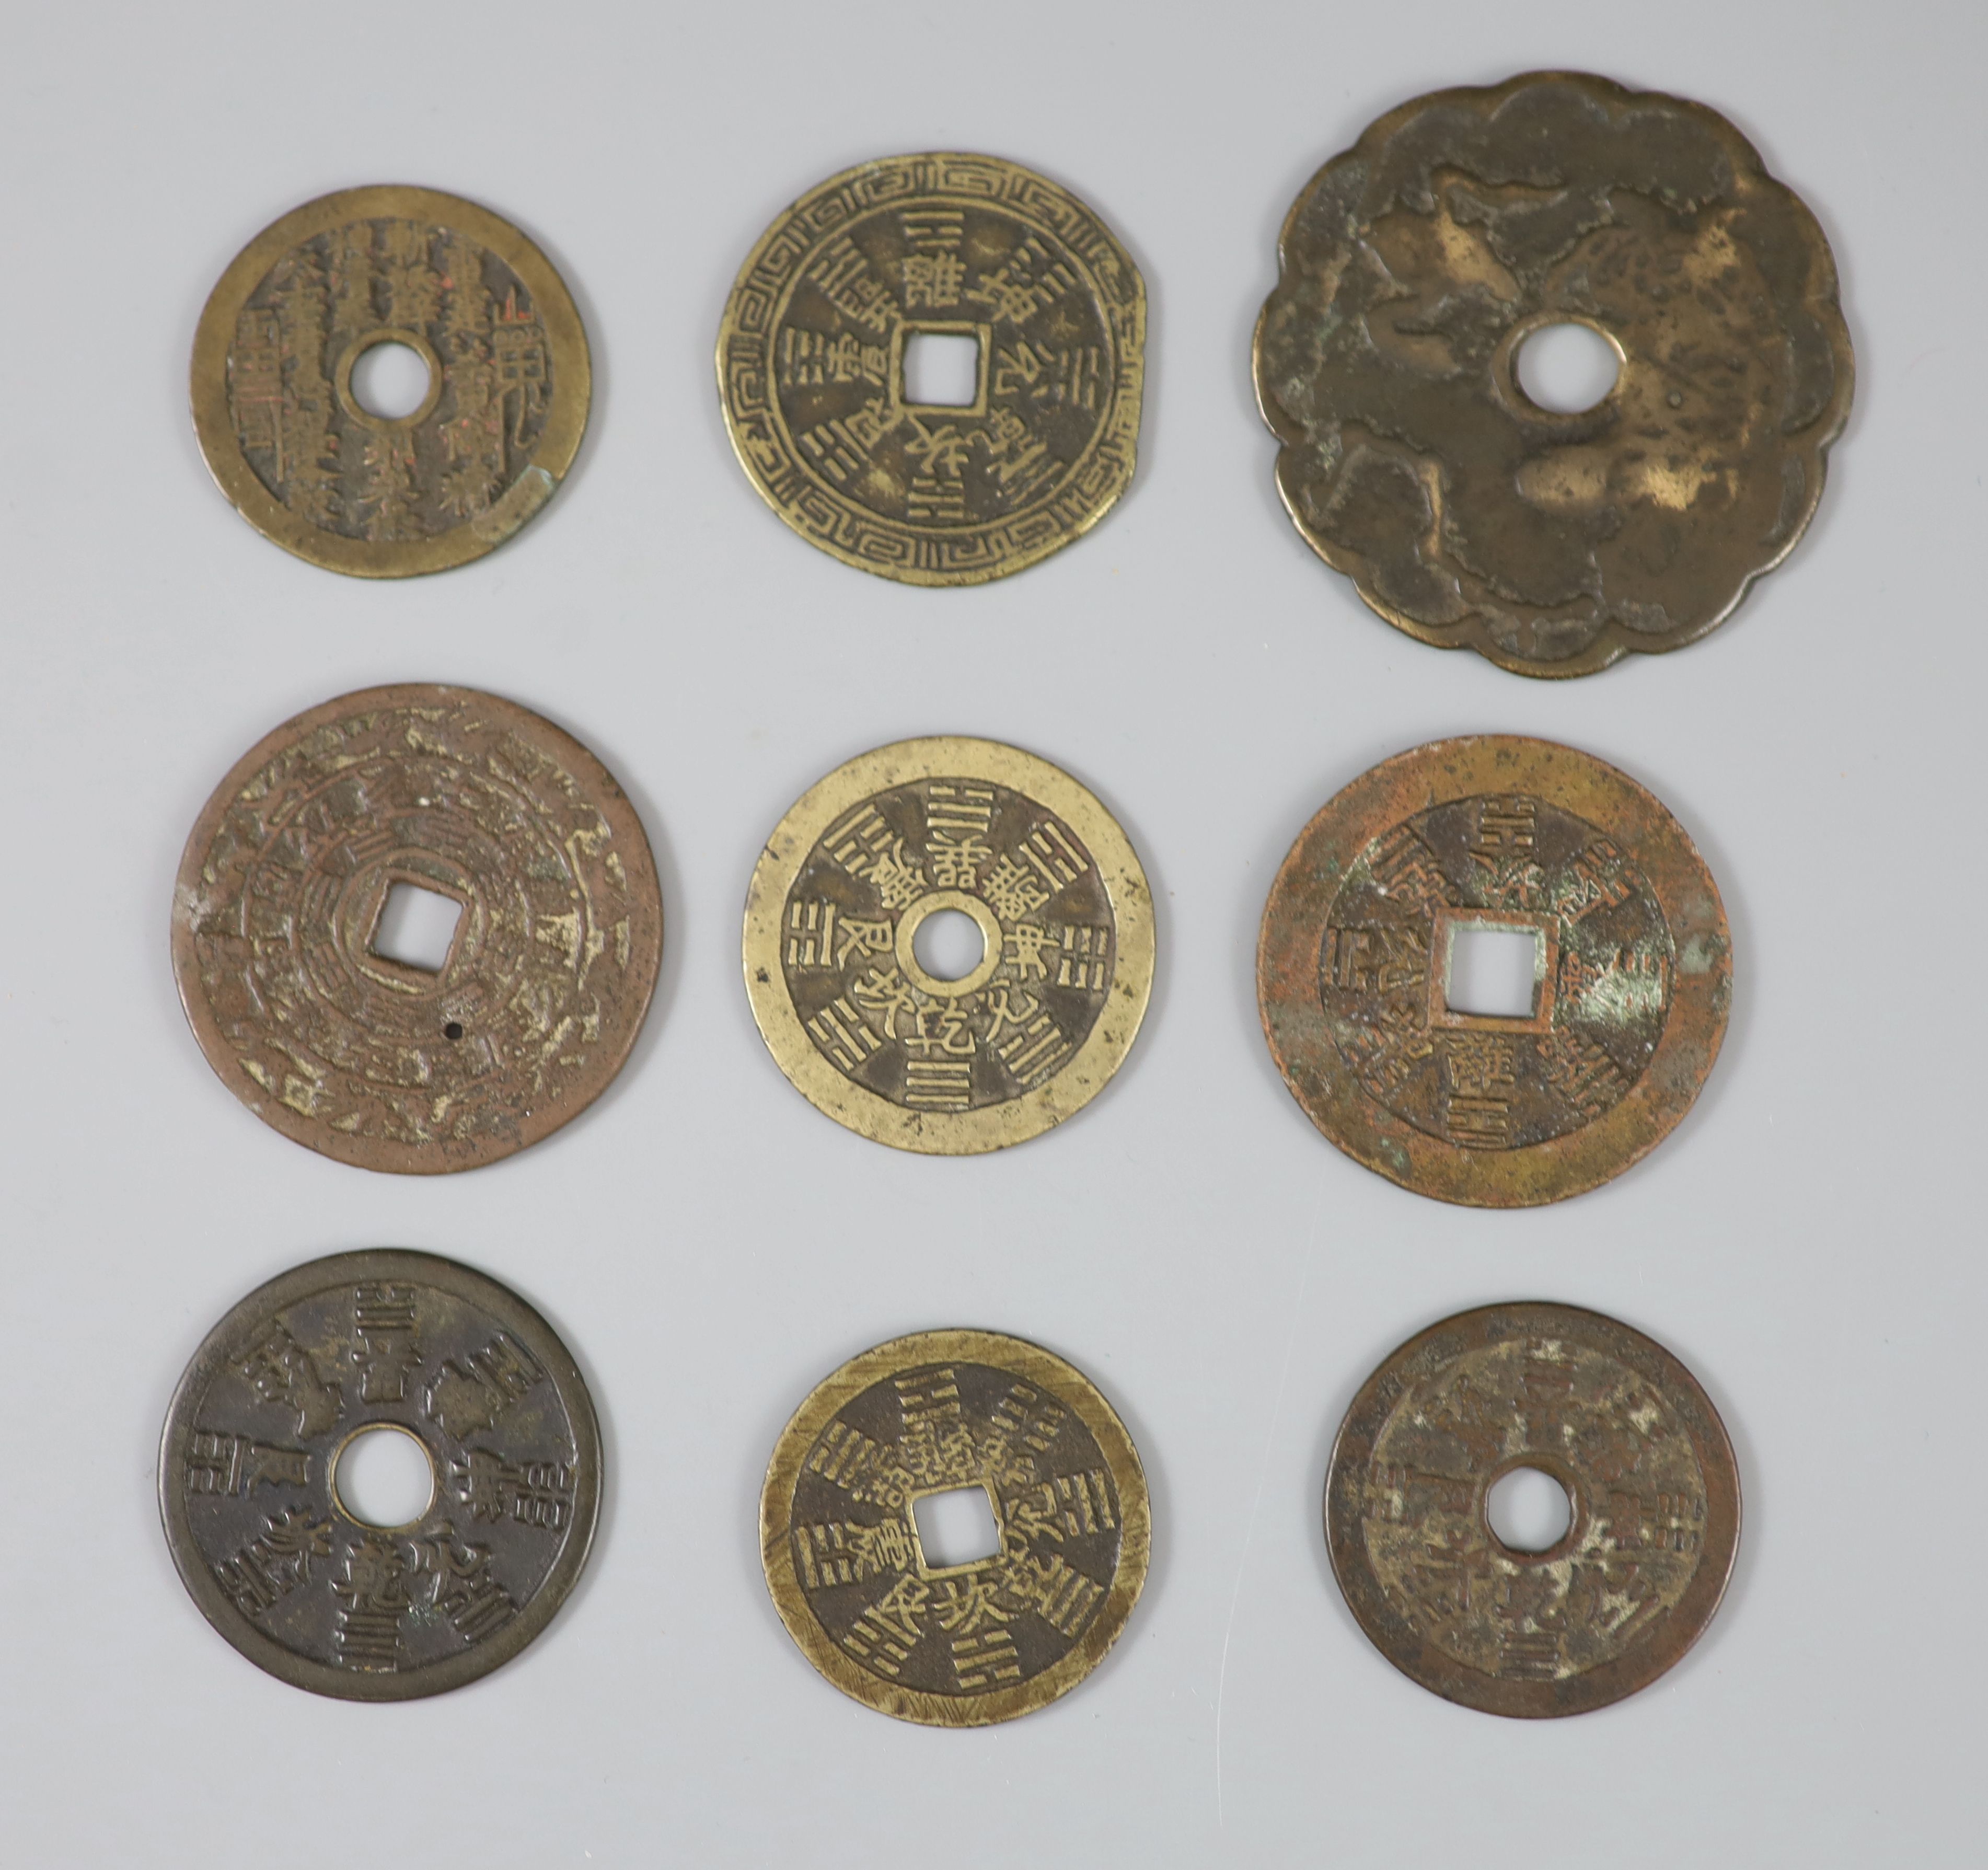 China, 9 bronze charms or amulets, Qing dynasty,